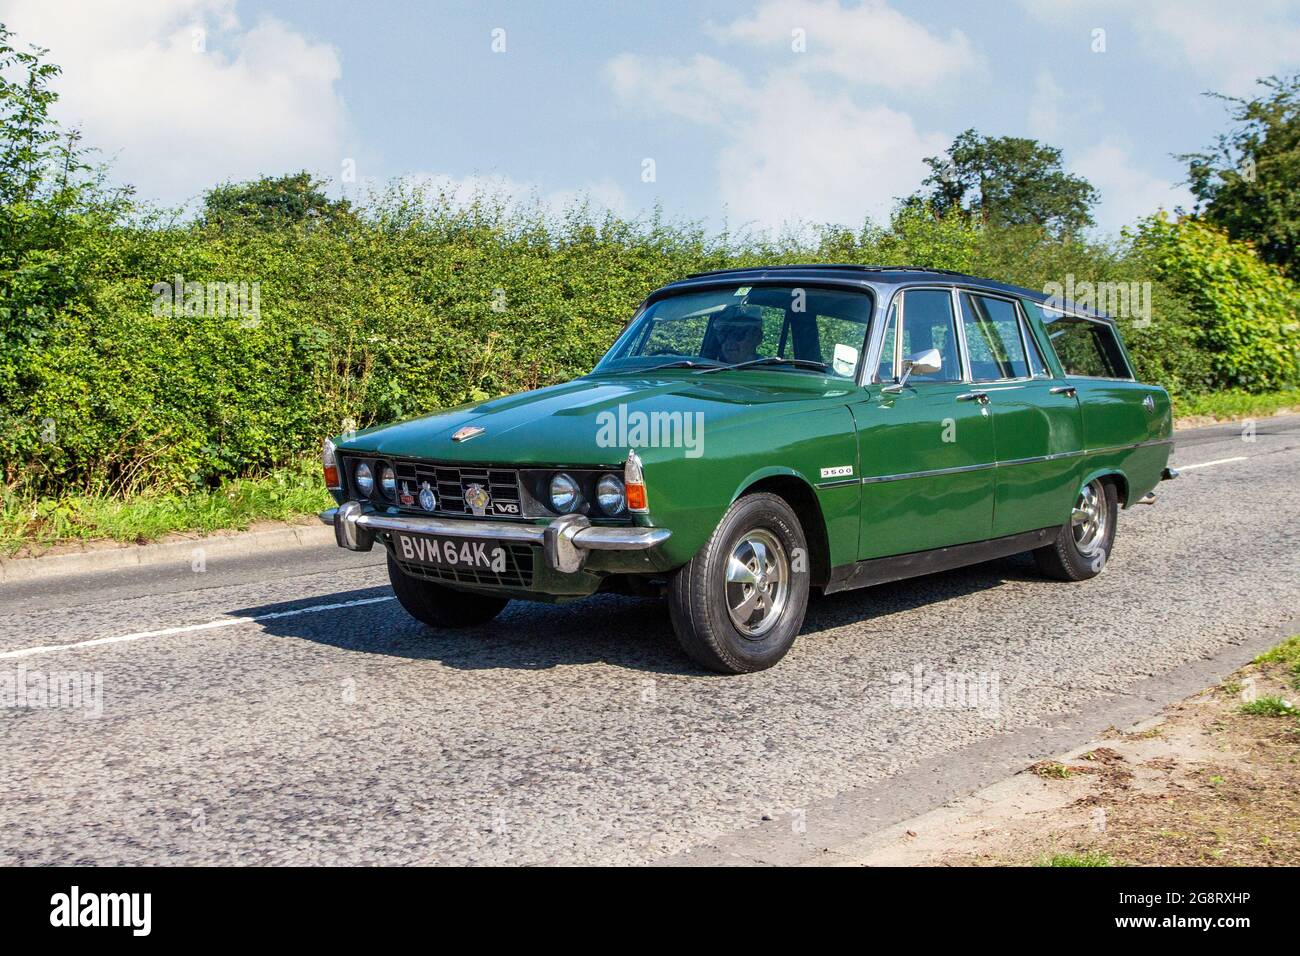 1972 70s modified green Rover V8 3500 4dr estate, en-route to Capesthorne Hall classic July car show, Cheshire, UK Stock Photo